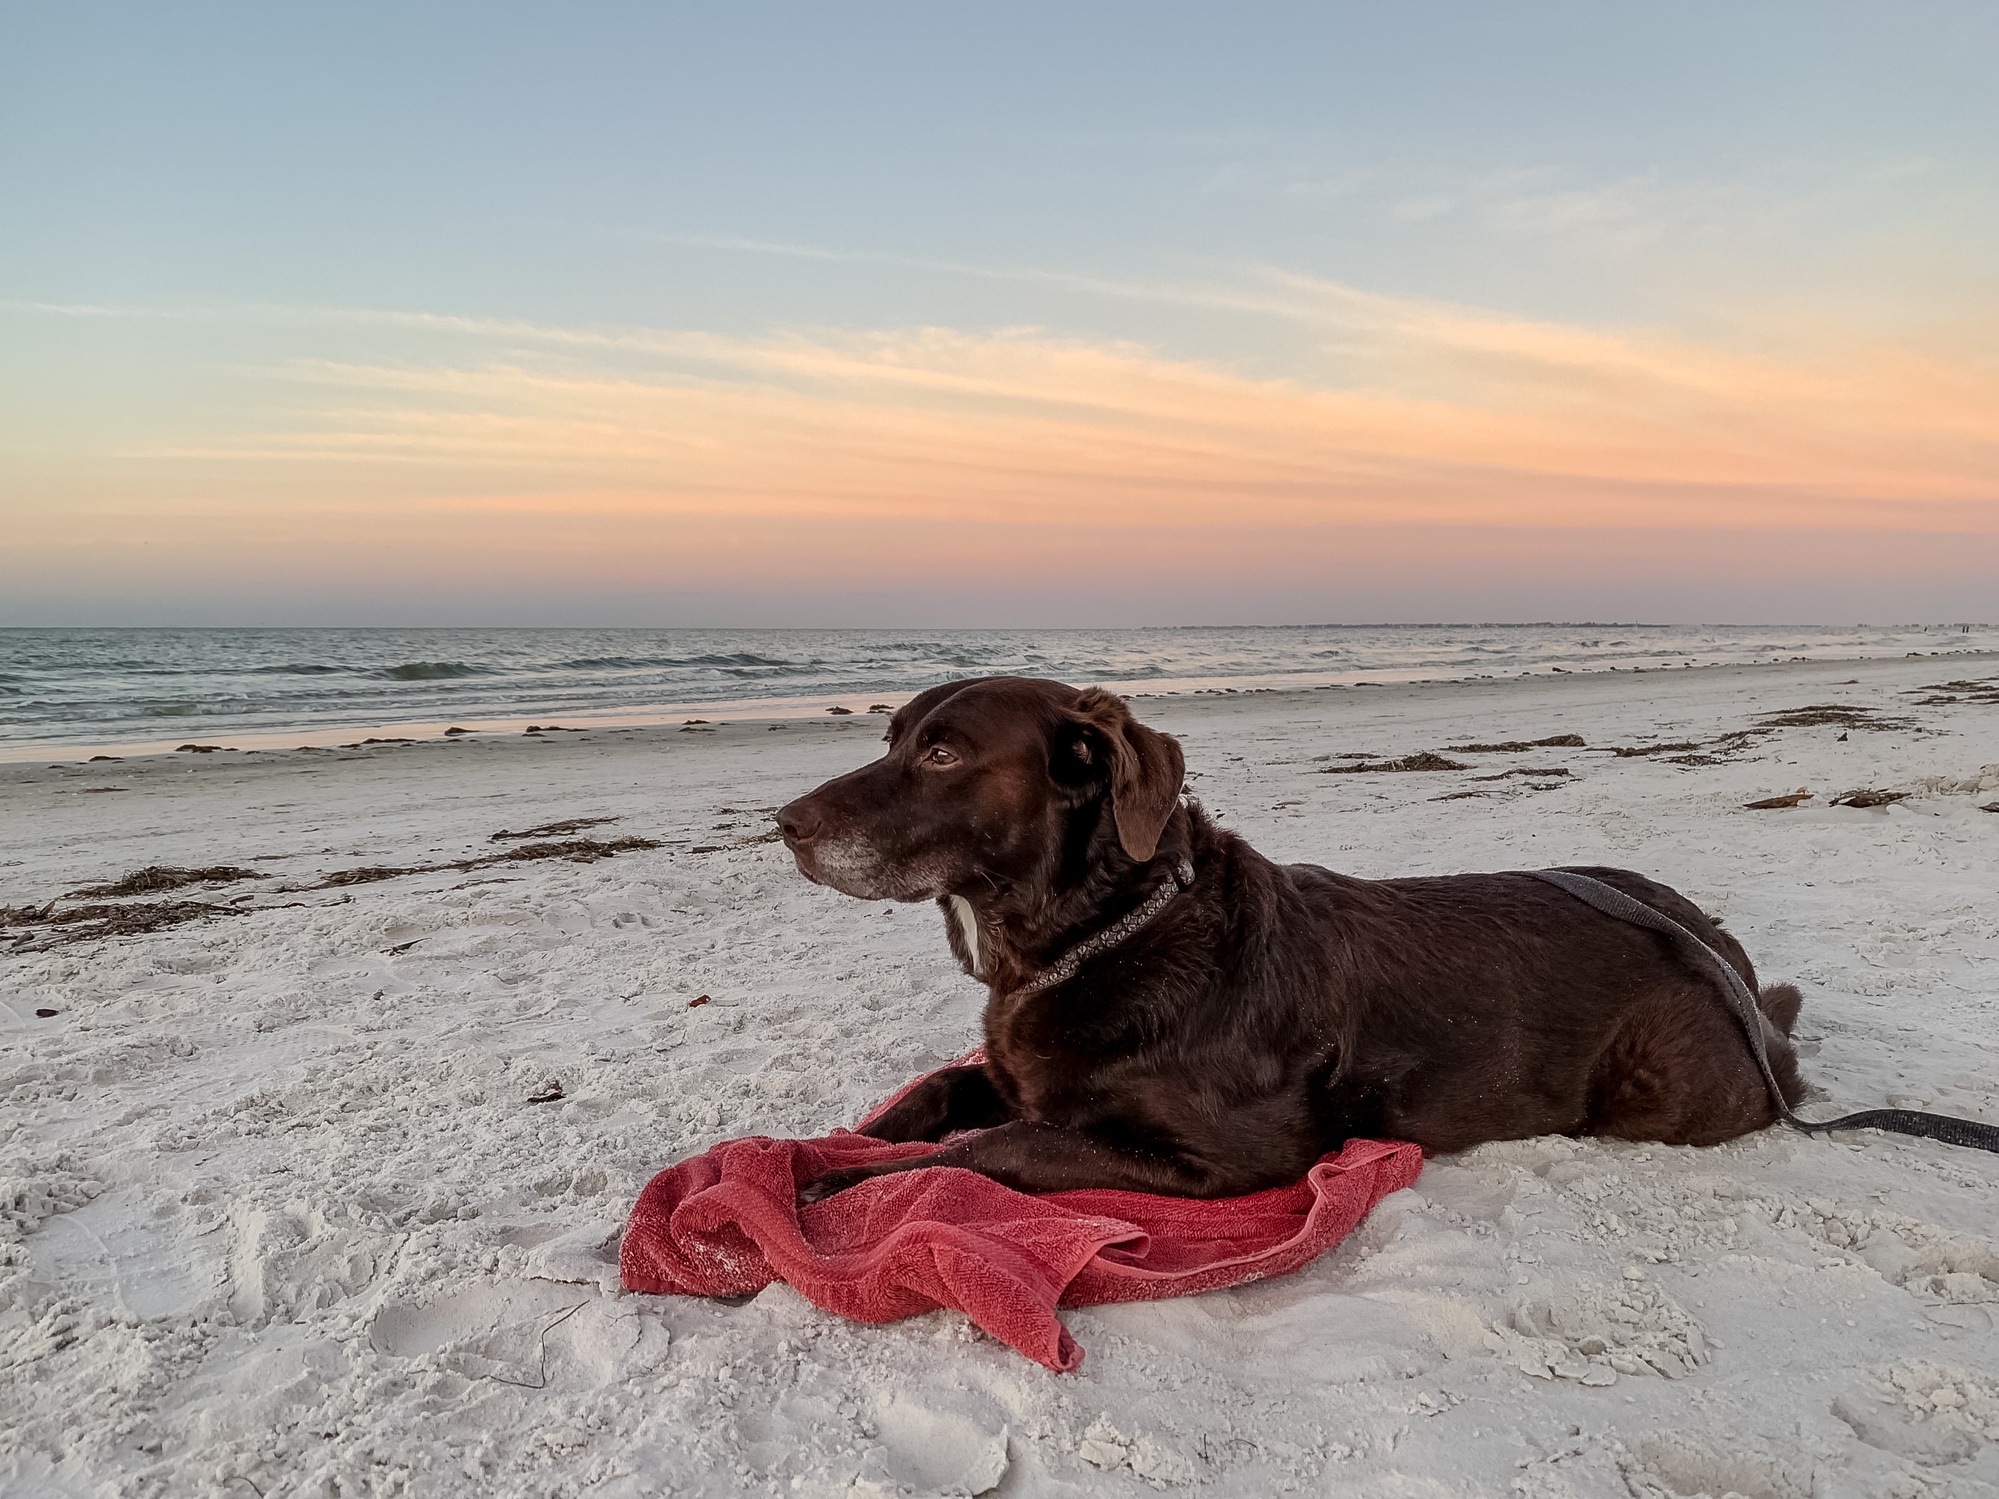 Chocolate labrador retriever laying on white sand beach and observing nature at sunrise along the Gulf of Mexico near Fort Meyers, FL.